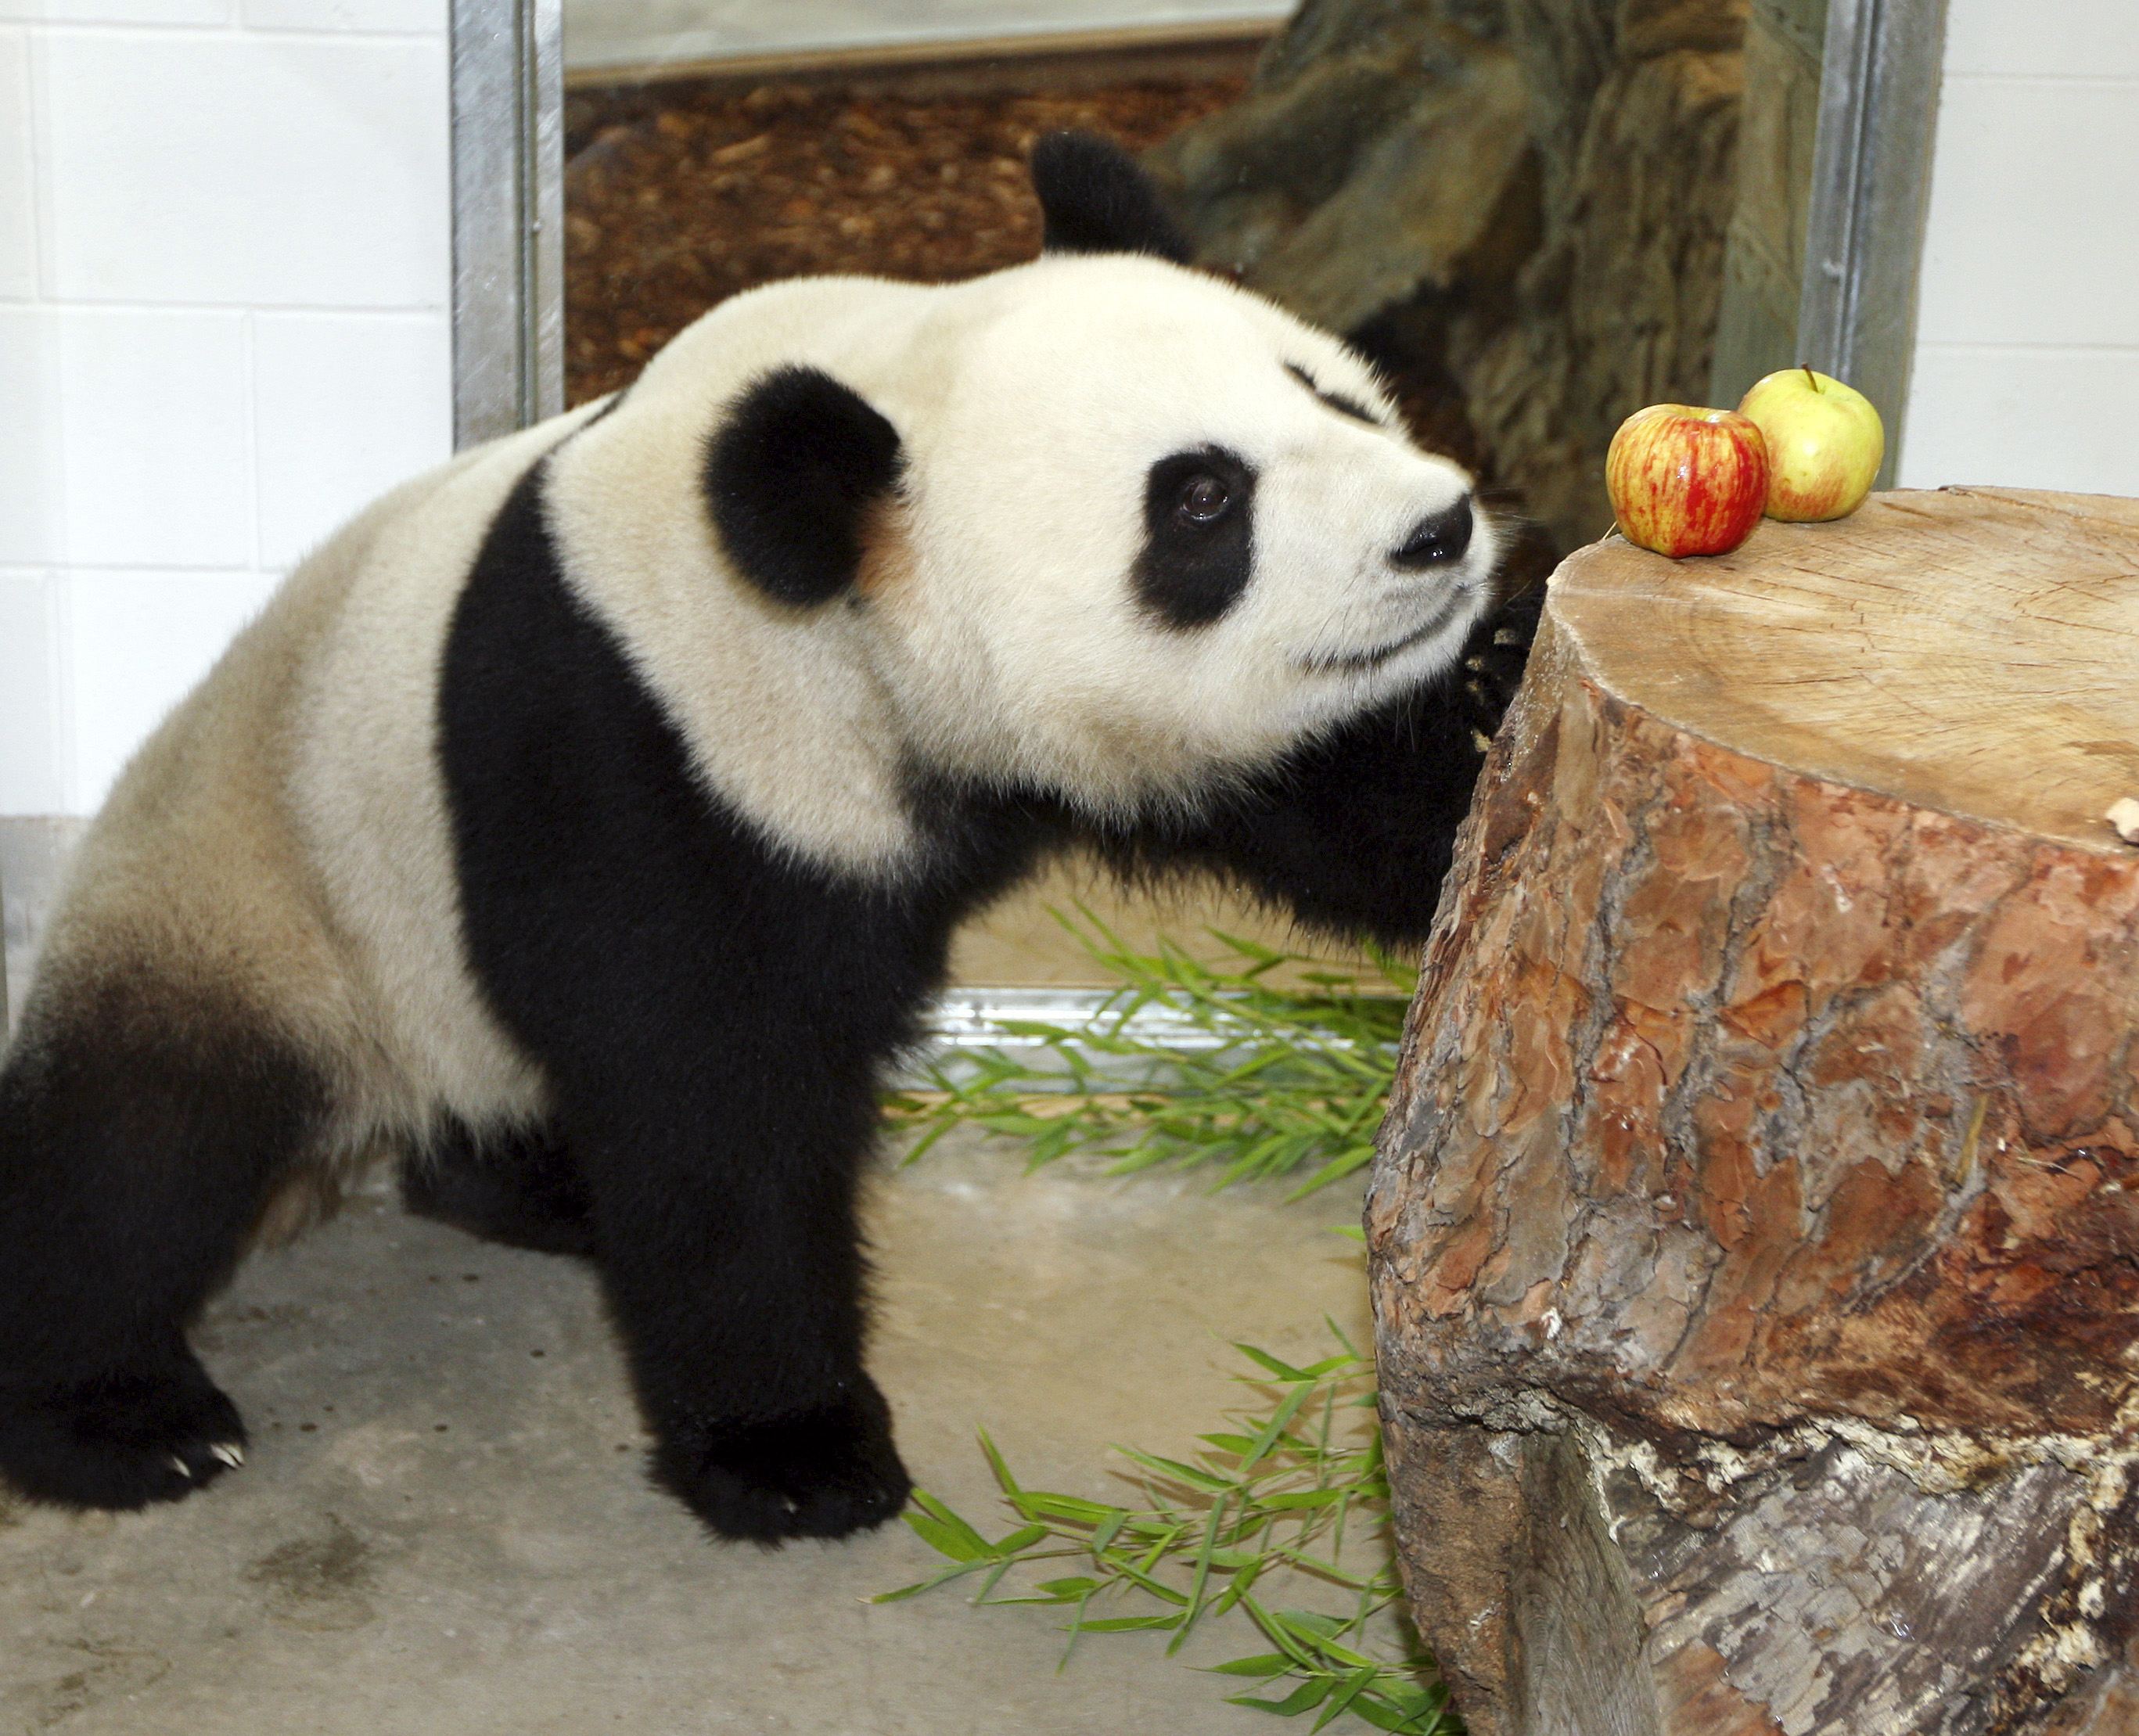 Funi at Adelaide Zoo in 2009. Photo: Reuters